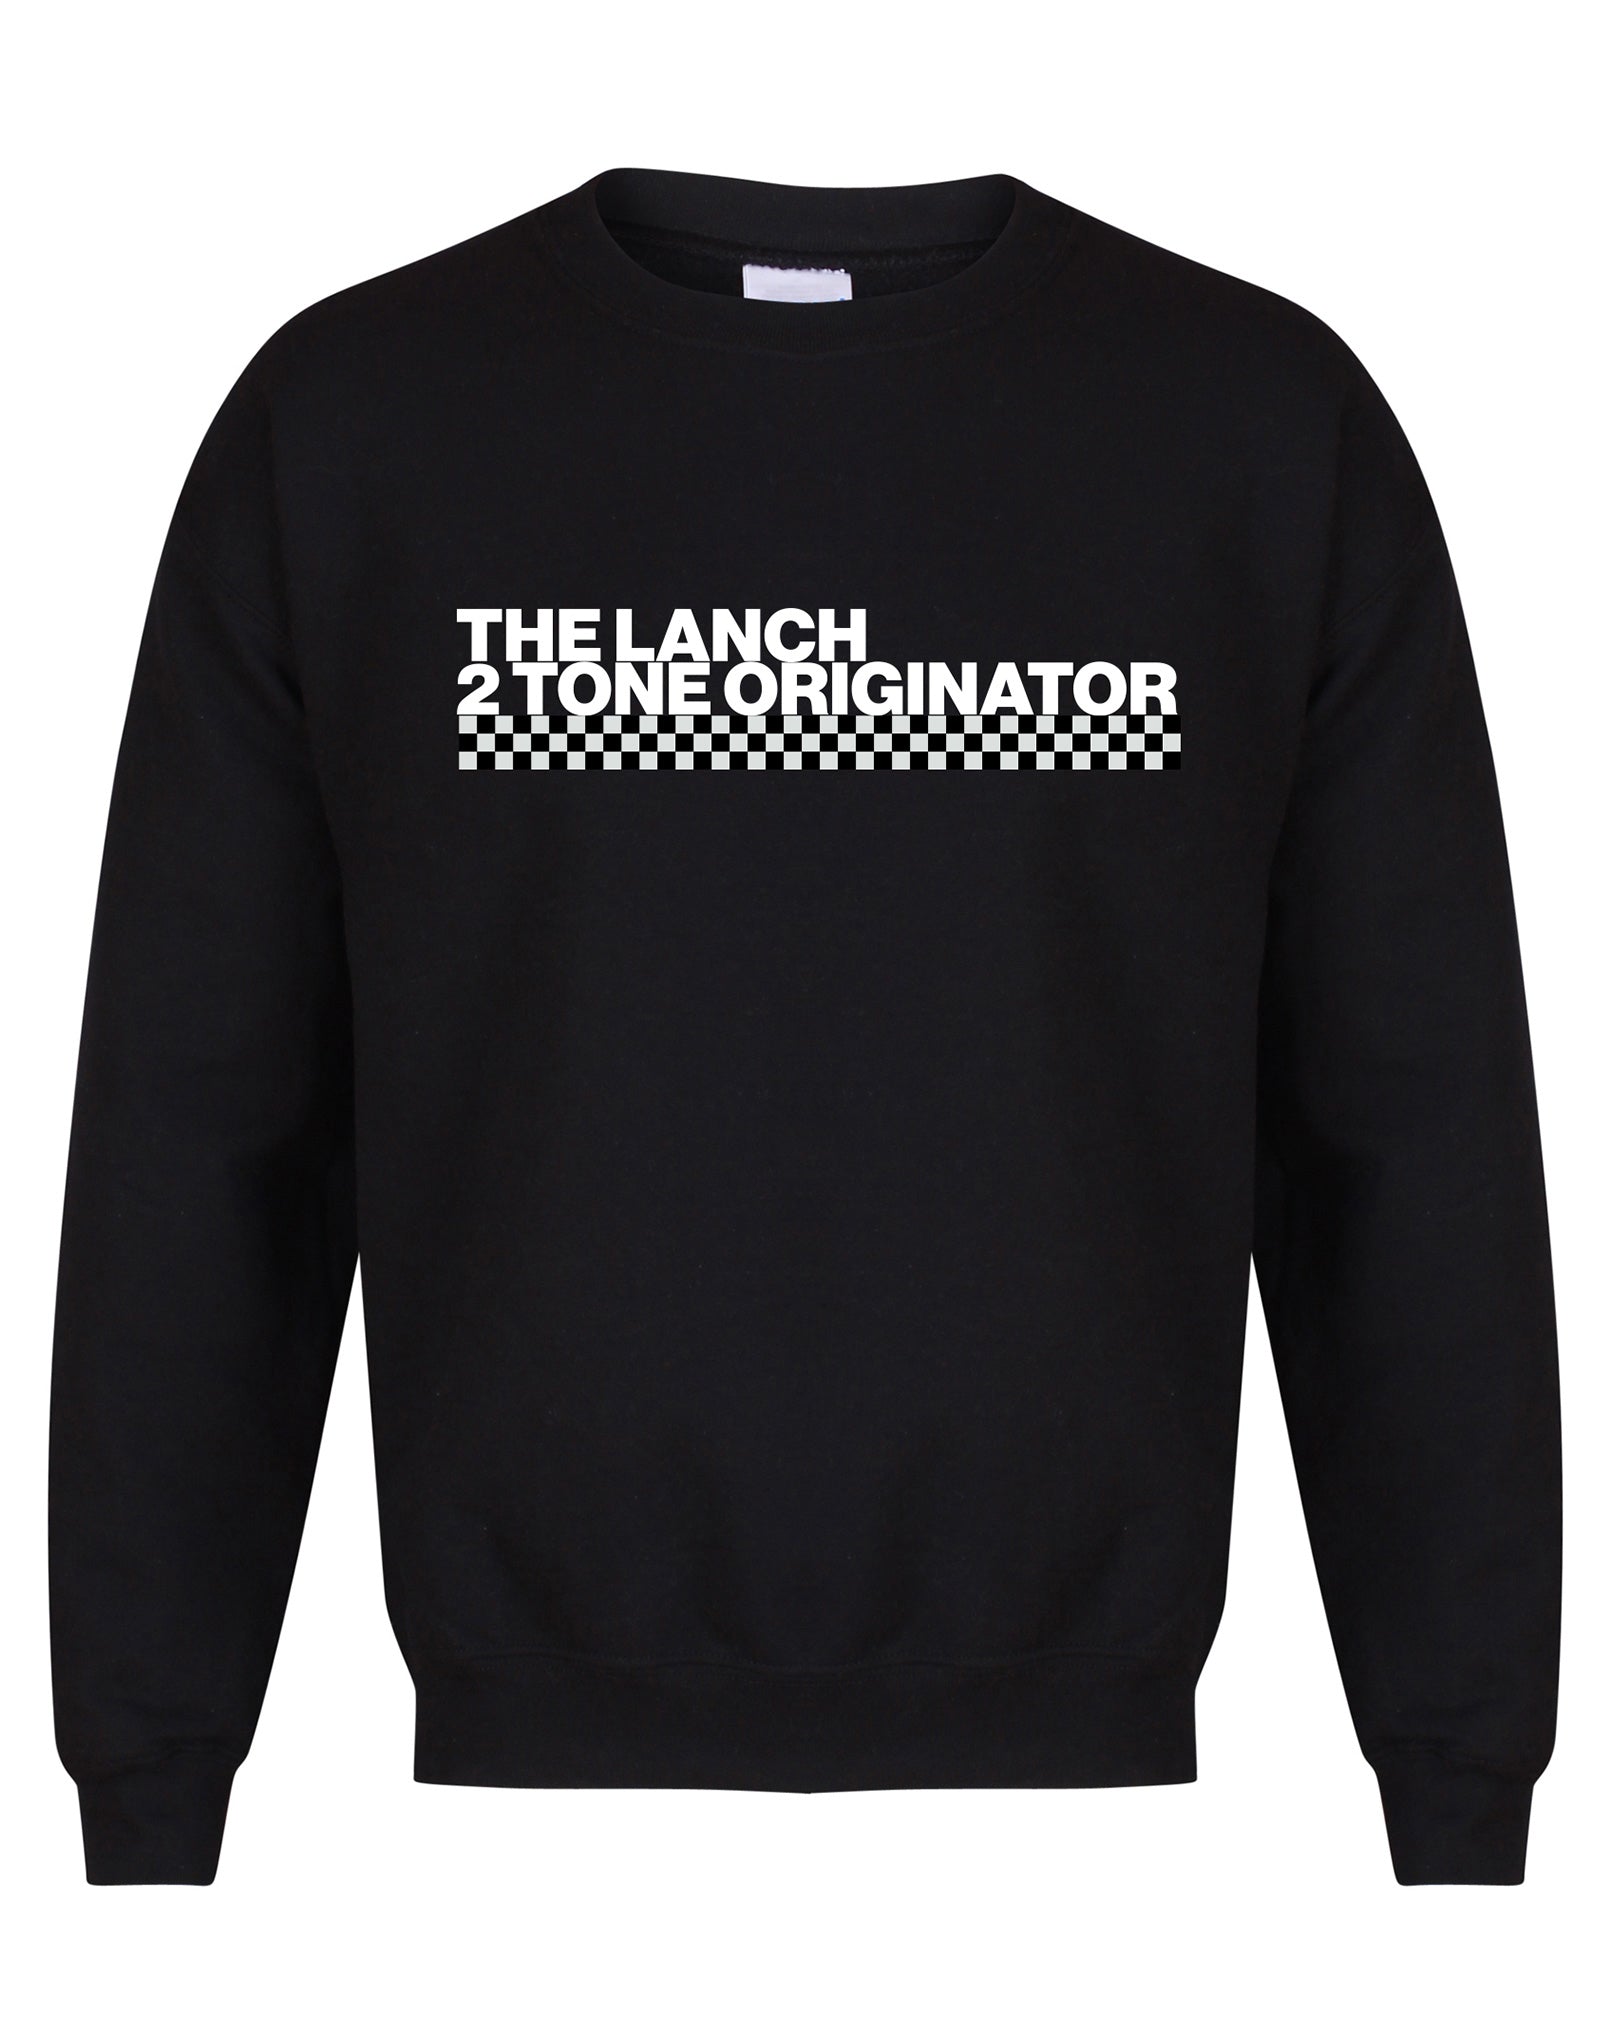 The Lanch - 2 Tone Originator - sweatshirt - various colours - Dirty Stop Outs